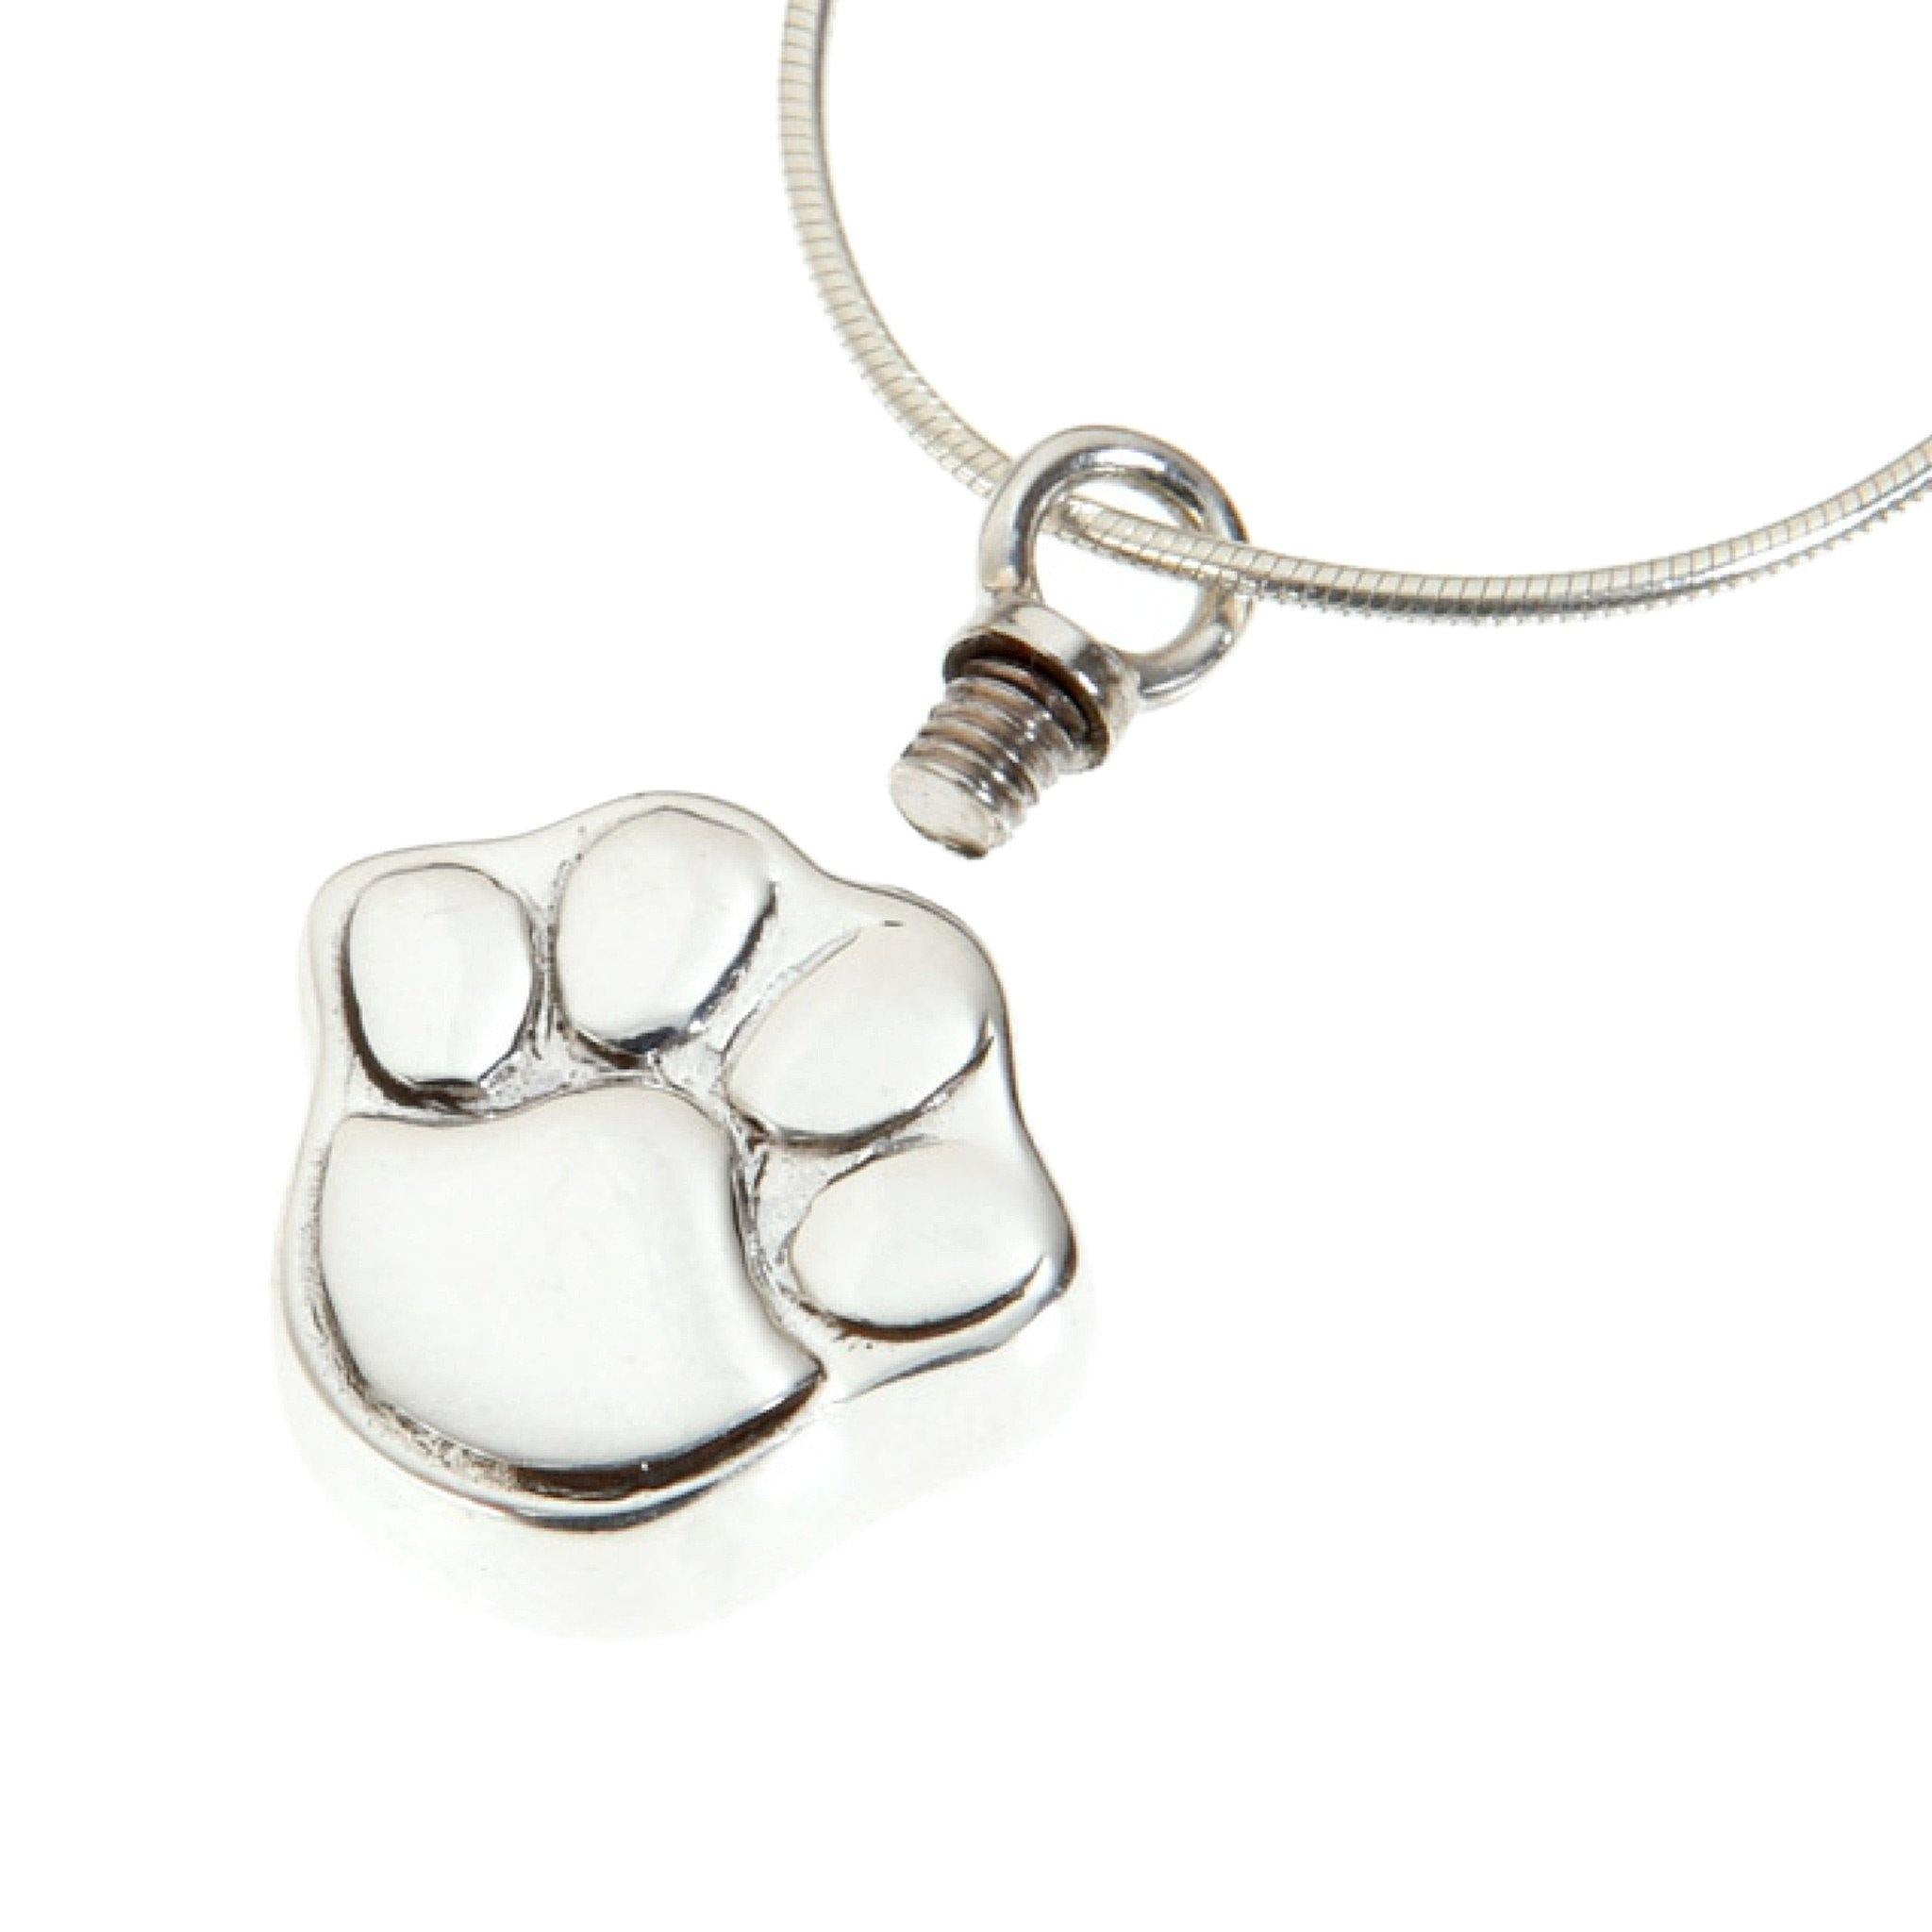 Mayfair Paw Cremation Ashes Pendant 925 Silver Urns UK